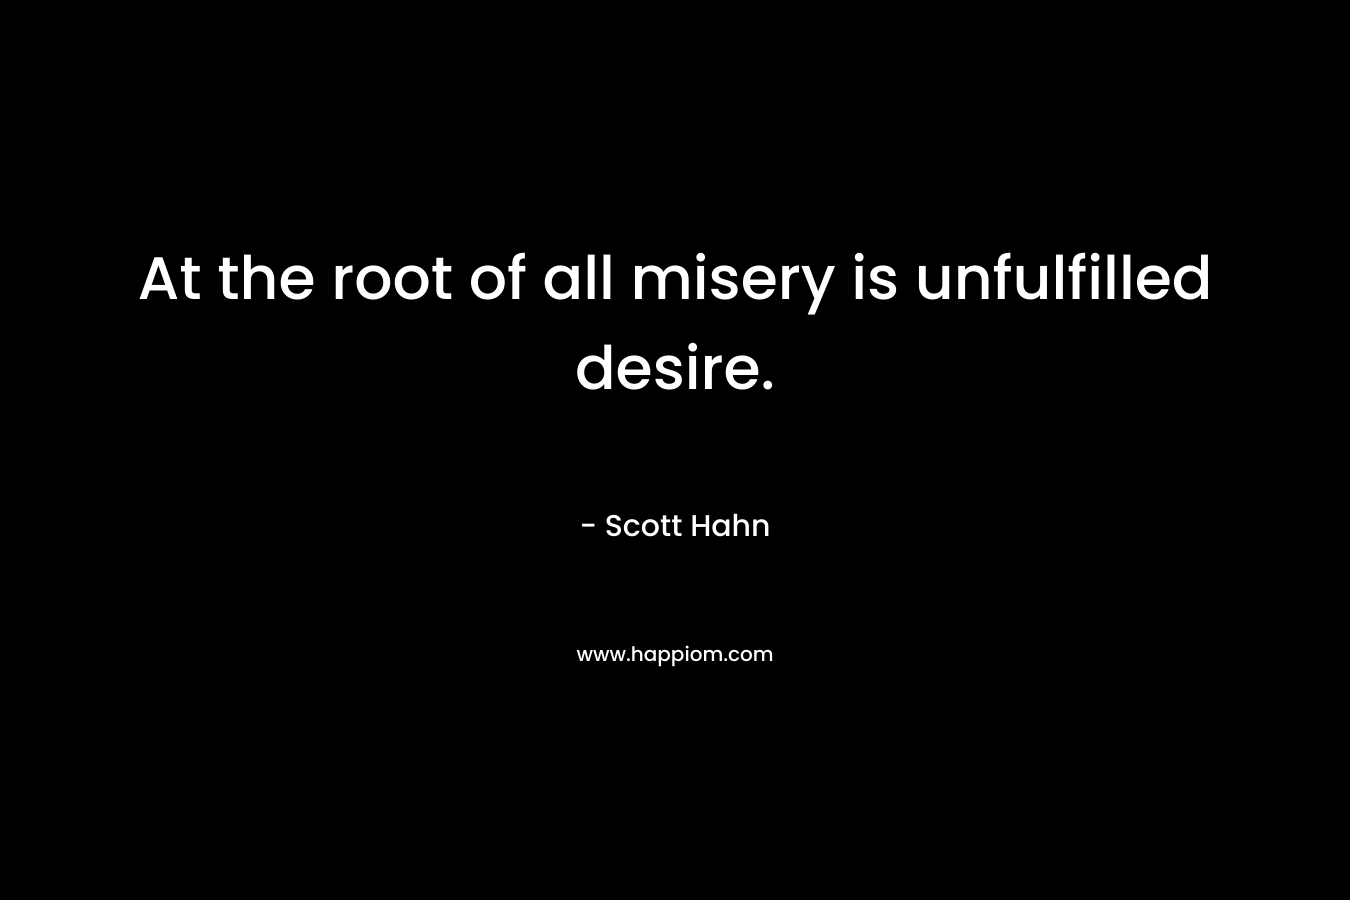 At the root of all misery is unfulfilled desire. – Scott Hahn